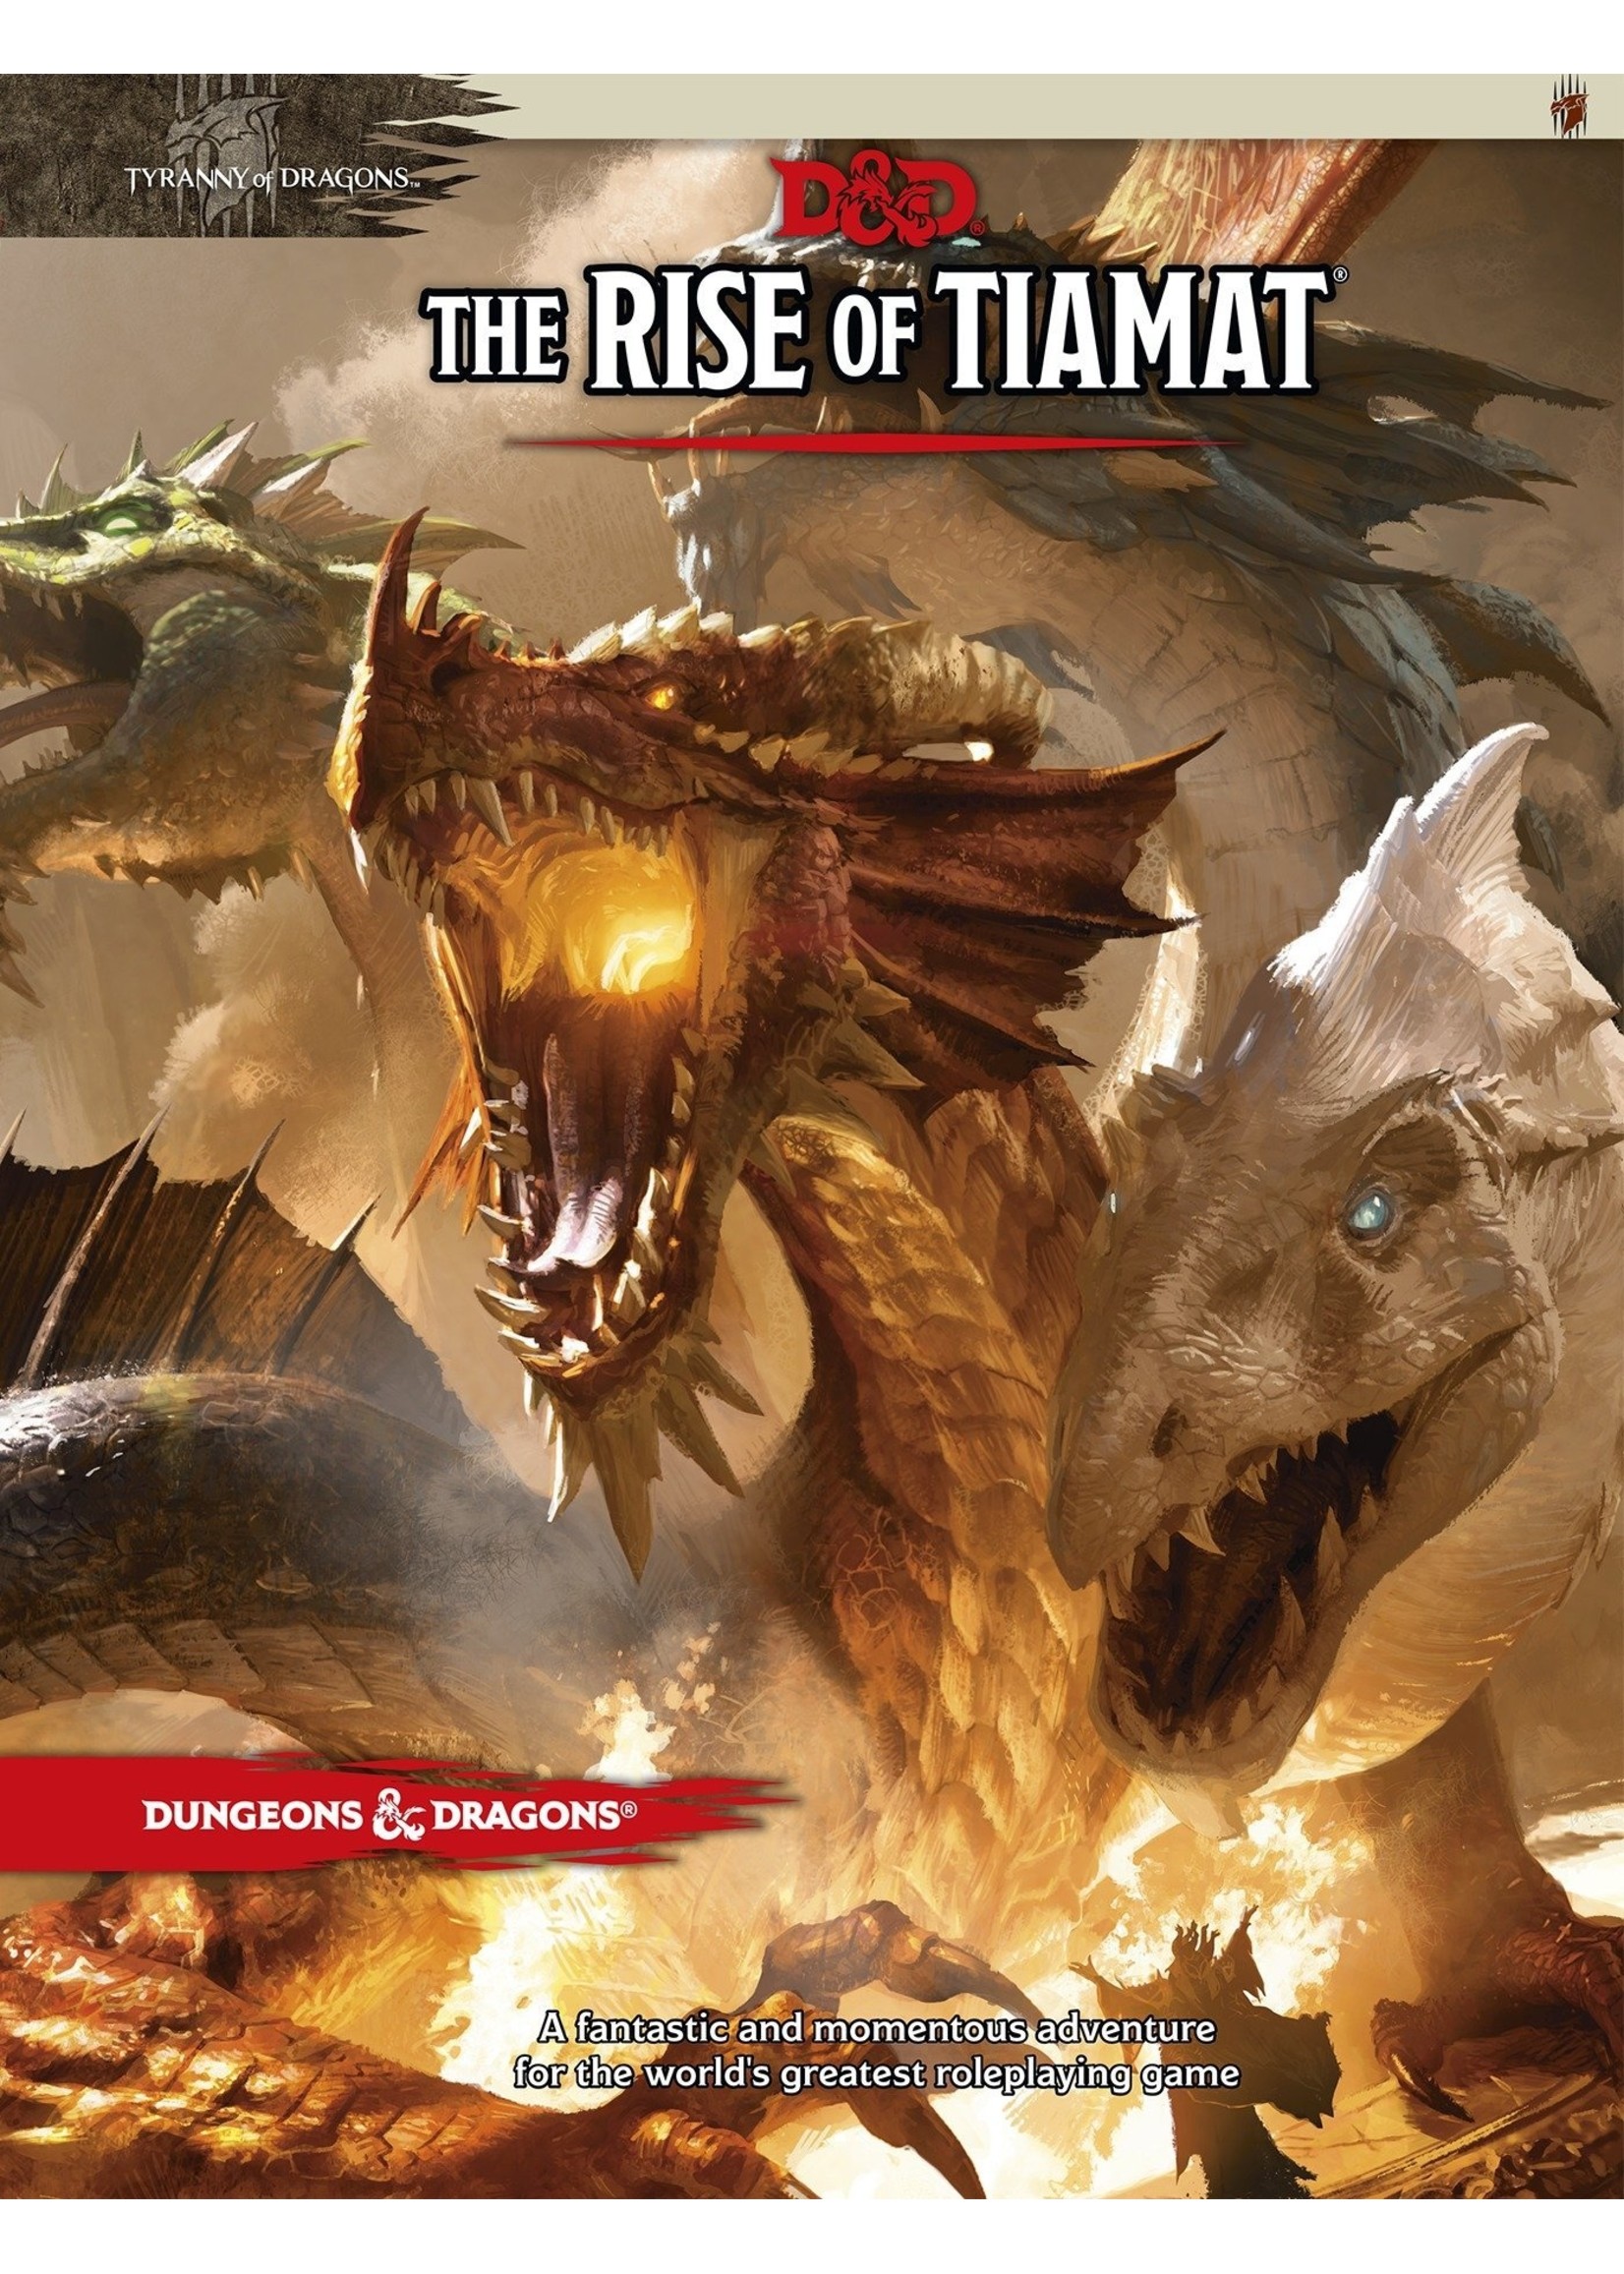 Dungeons & Dragons 5e D&D 5th Edition: The Rise of Tiamat